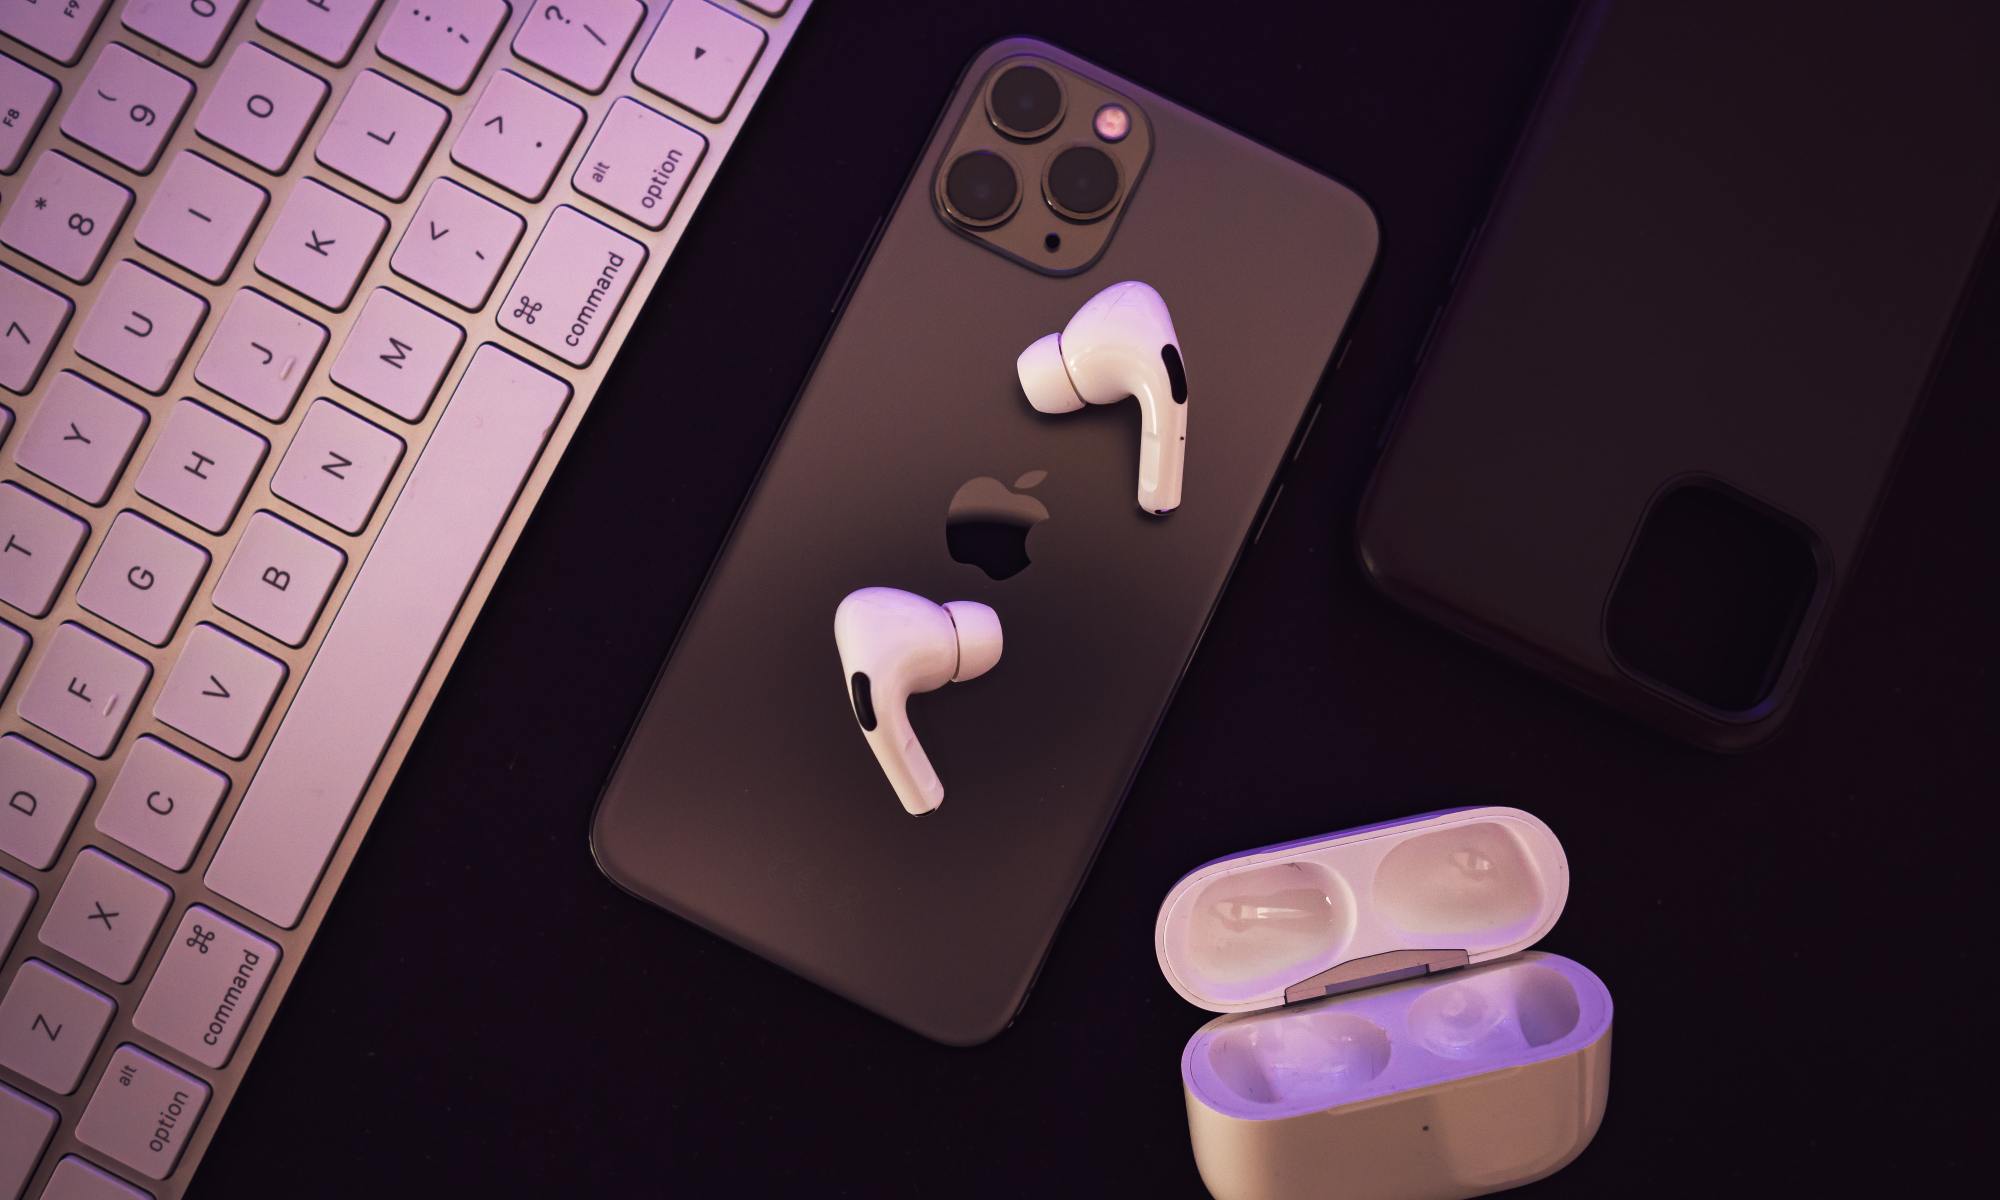 A picture of the iPhone 11 Pro Max with the AirPods Pro.